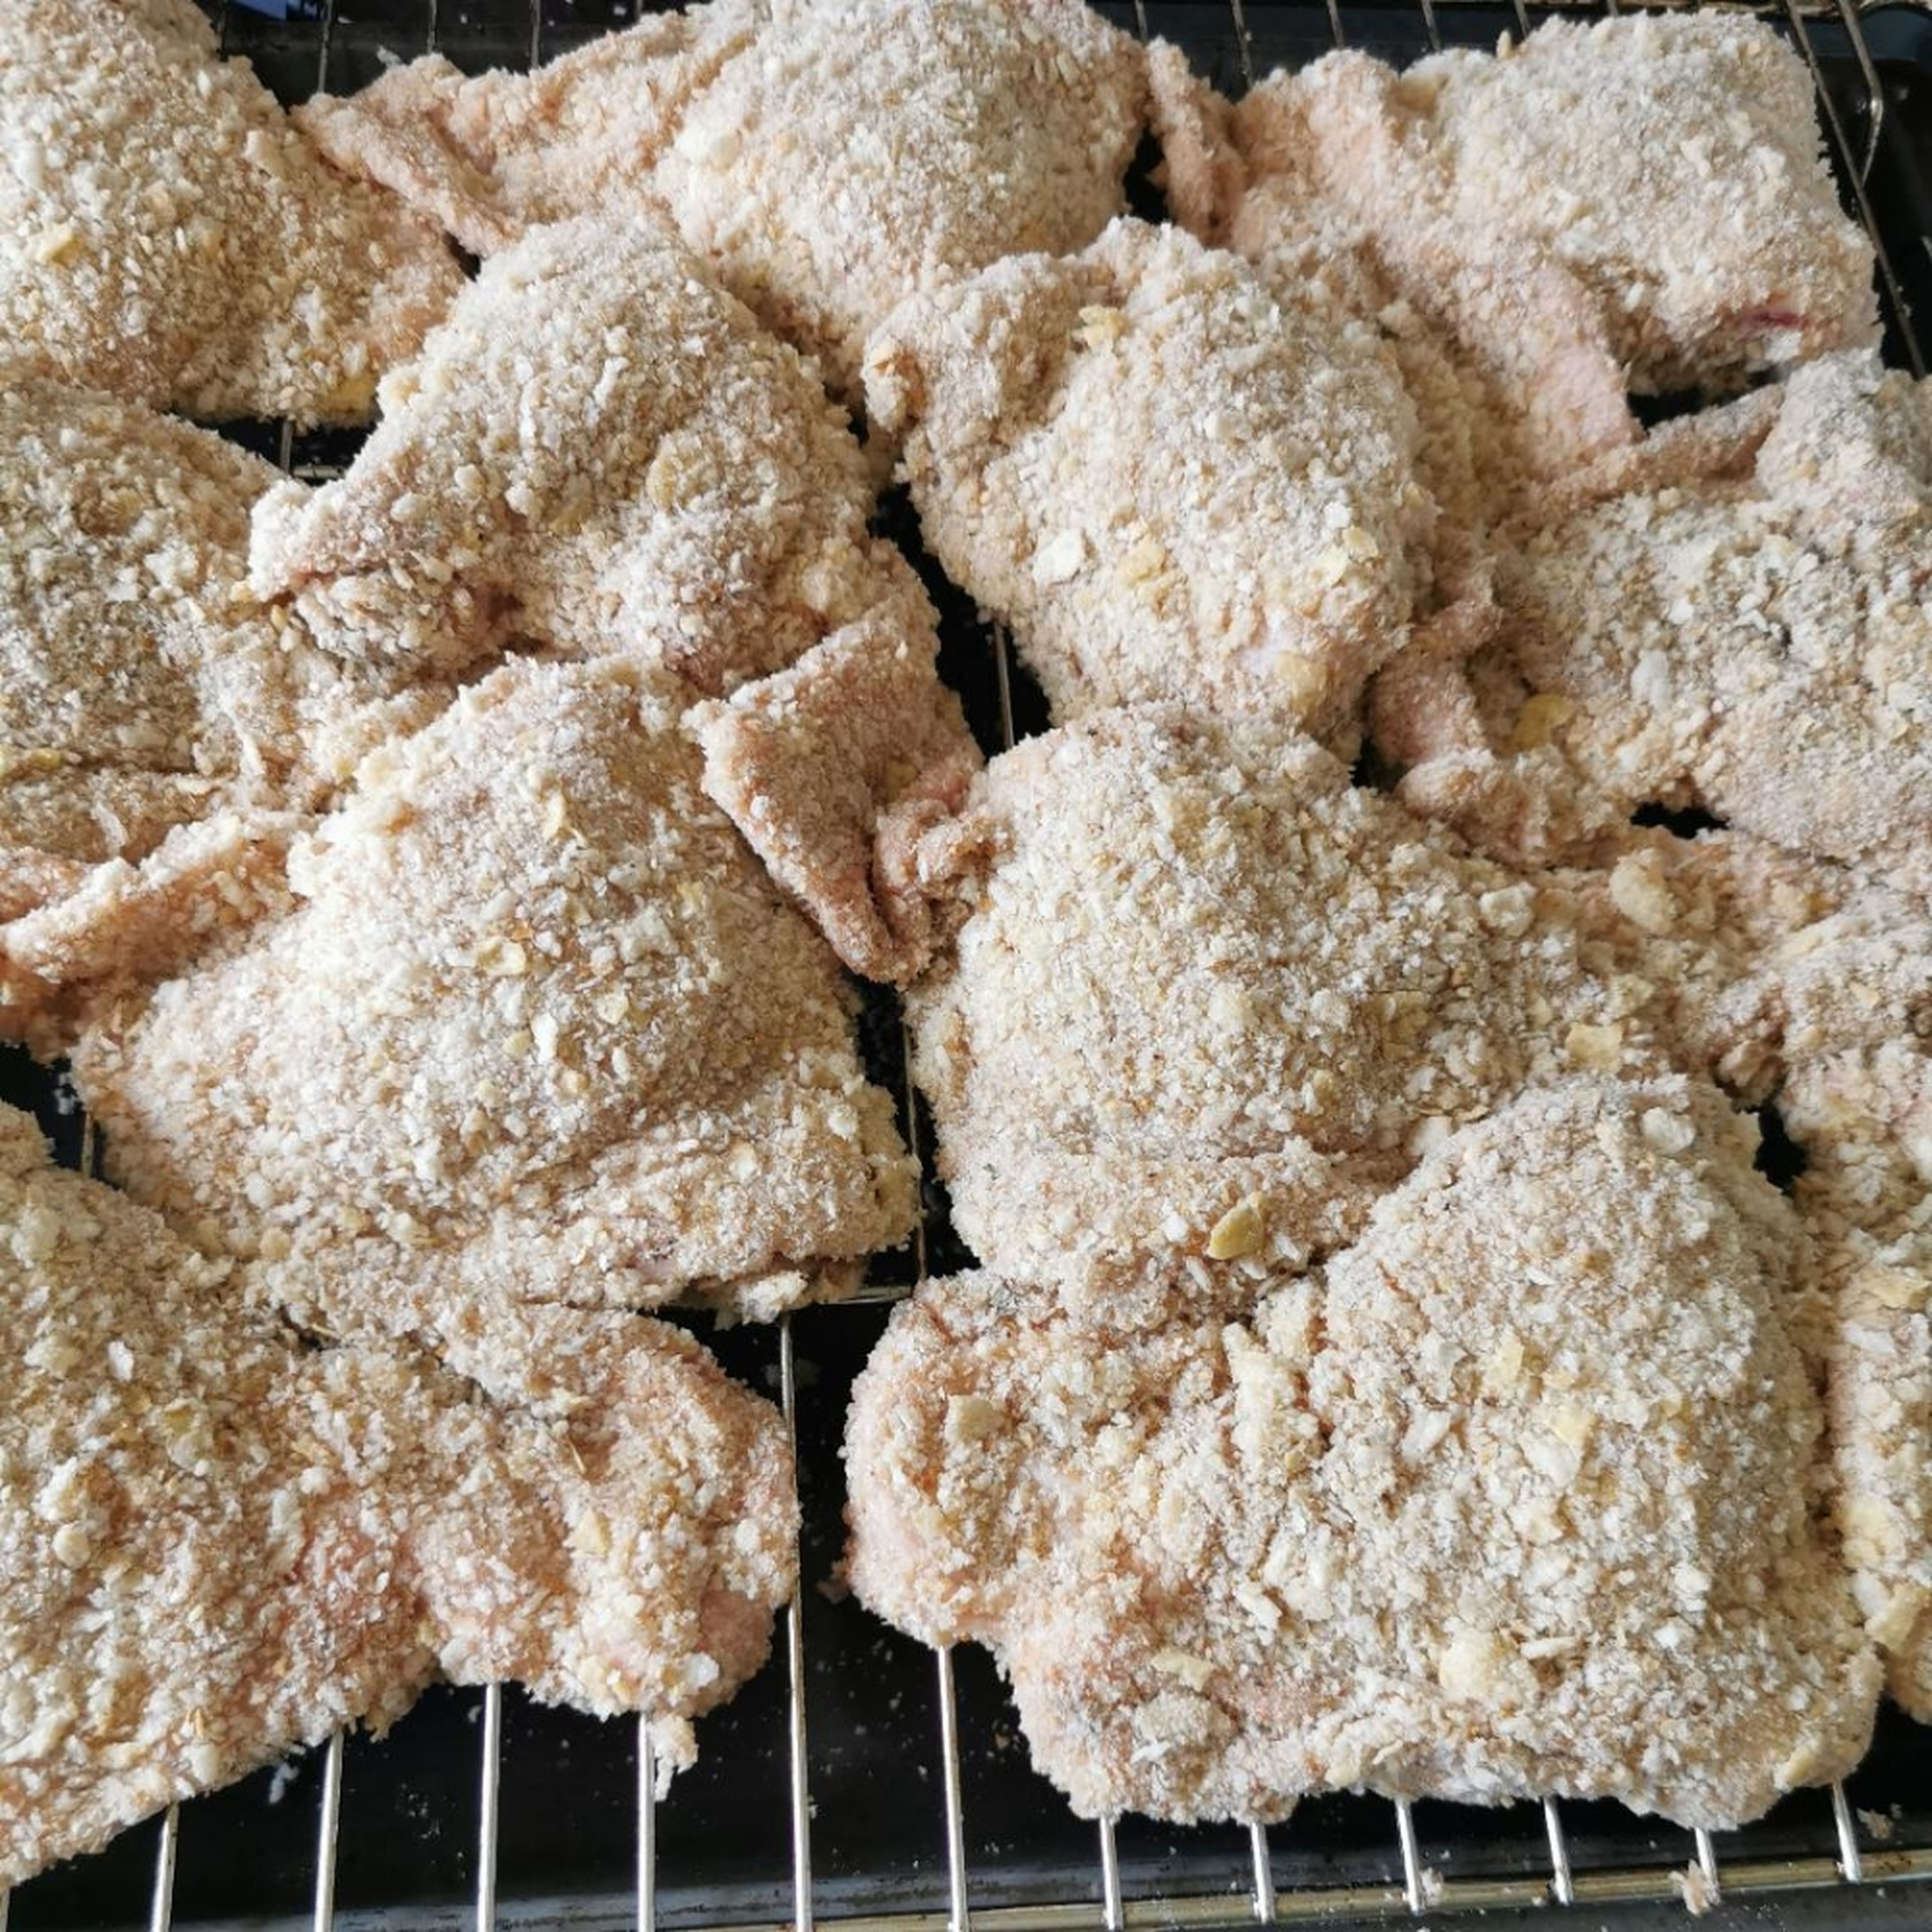 Once all you portions are crumbed, place on a wire rack. Drizzle with oil or spray you won't need to much as the fat in the skin will help to crisp the coating. I placed a bit of sweet potato under the chicken to roast, saving time.